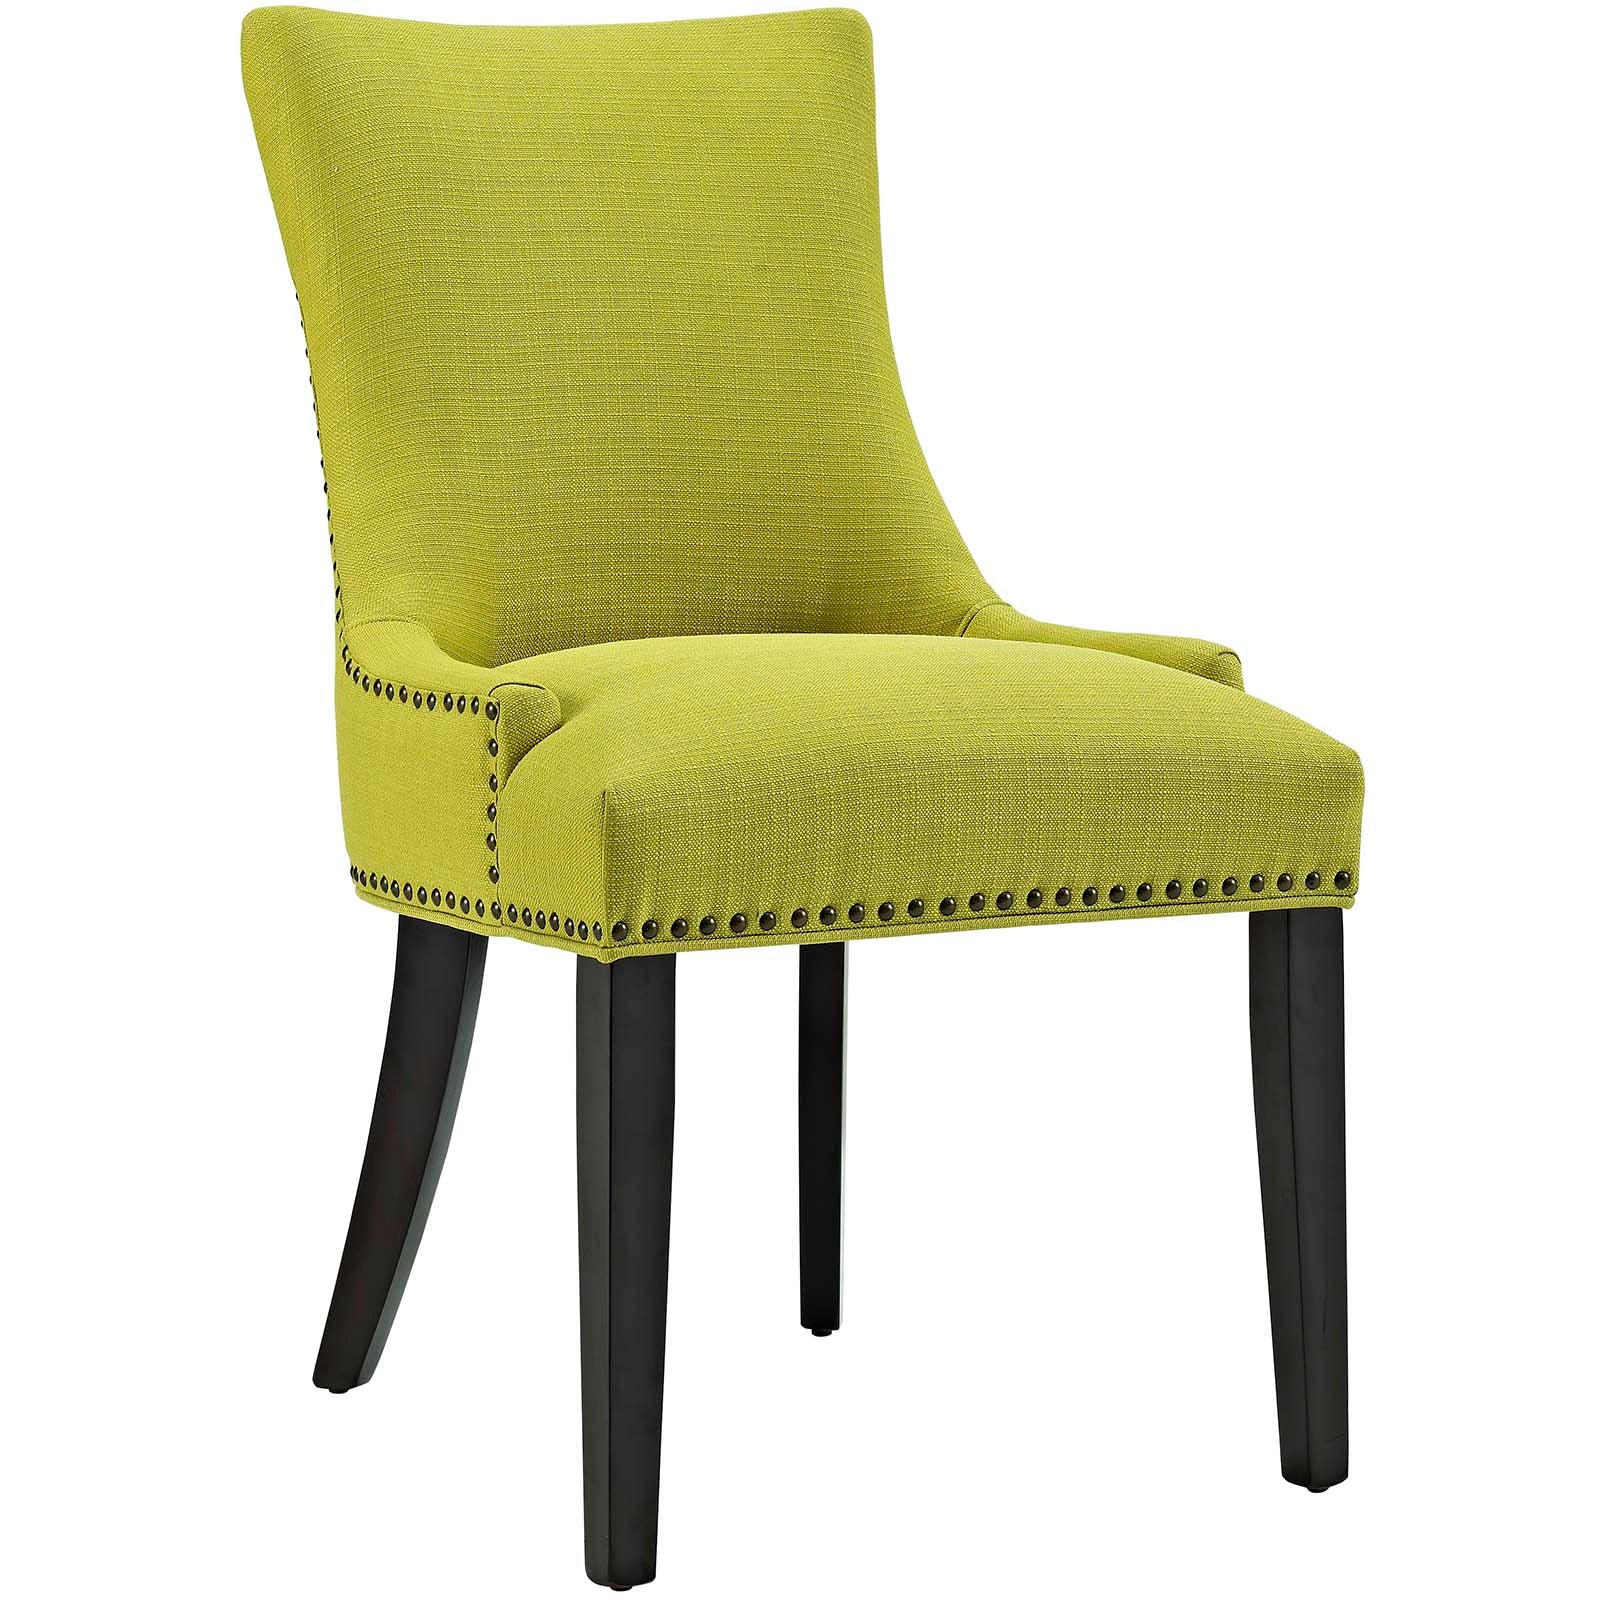 Modway Dining Chairs - Marquis Dining Side Chair Fabric Wheatgrass (Set of 2)